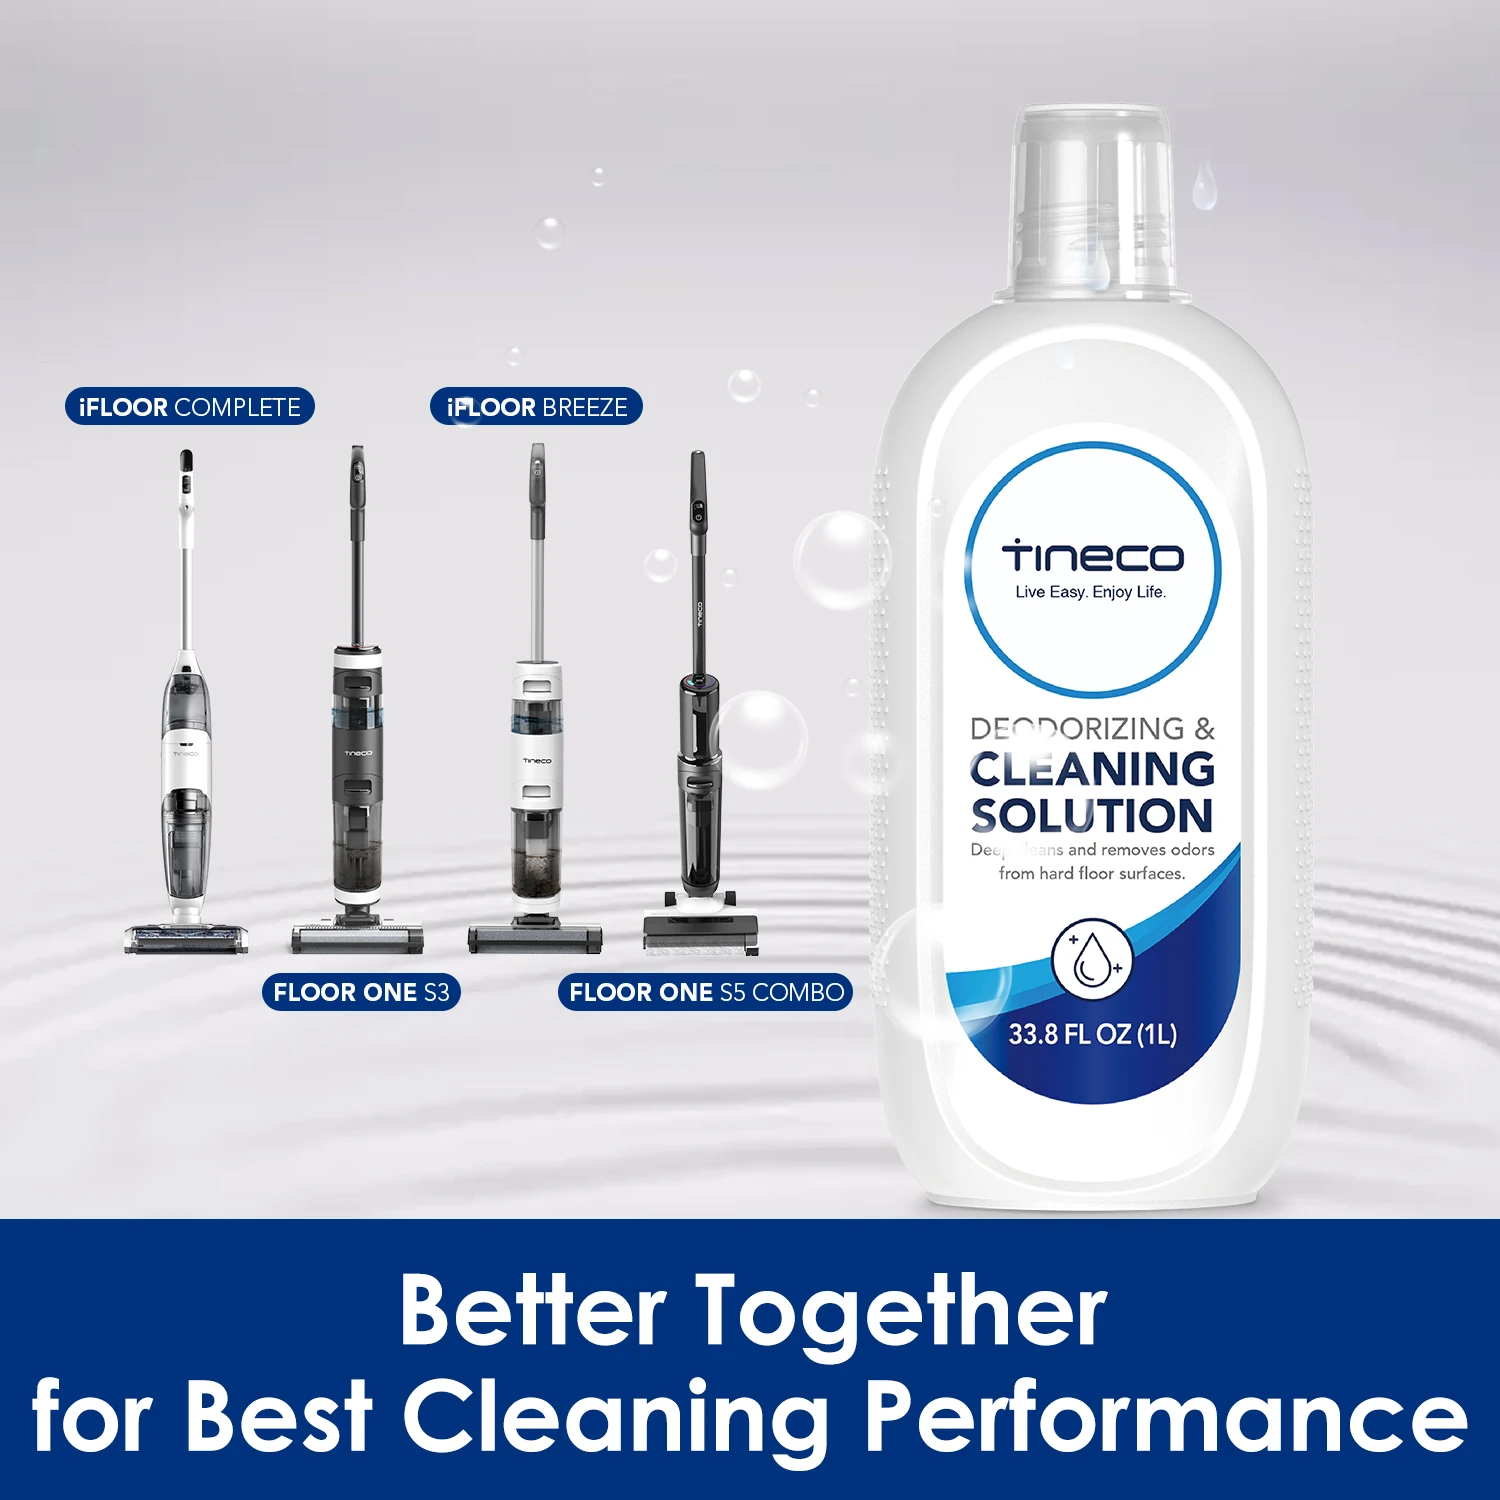 Tineco - Q: How much cleaning solution should I use each time